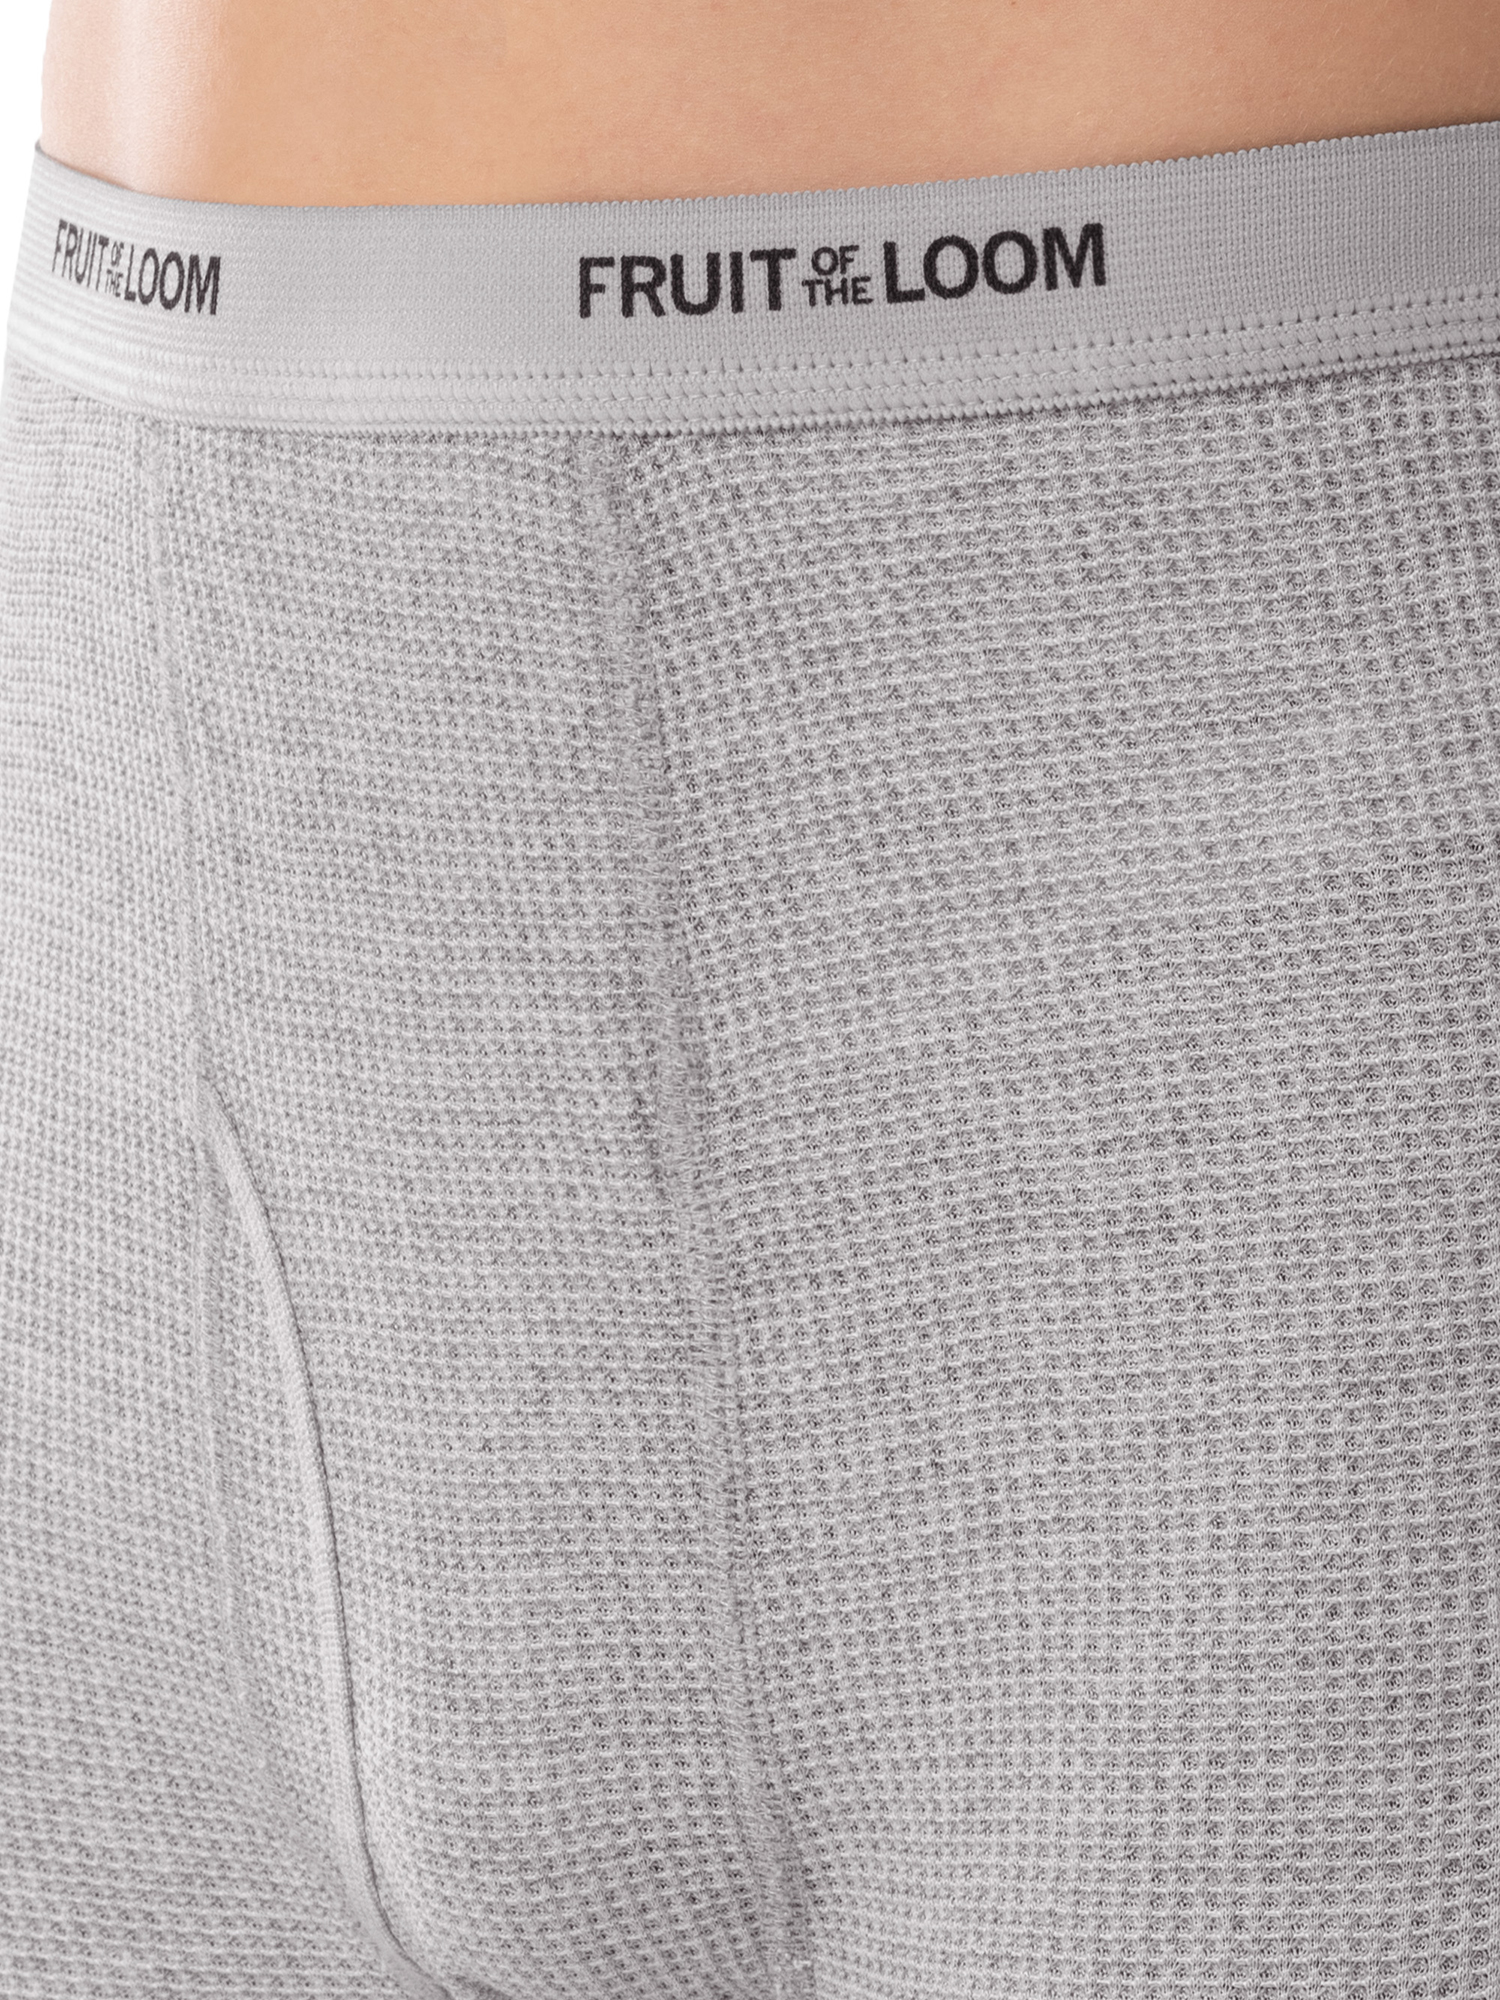 Fruit of the Loom Men's Thermal Waffle Underwear Bottom, 2-Pack, Sizes S-5XL - image 5 of 13